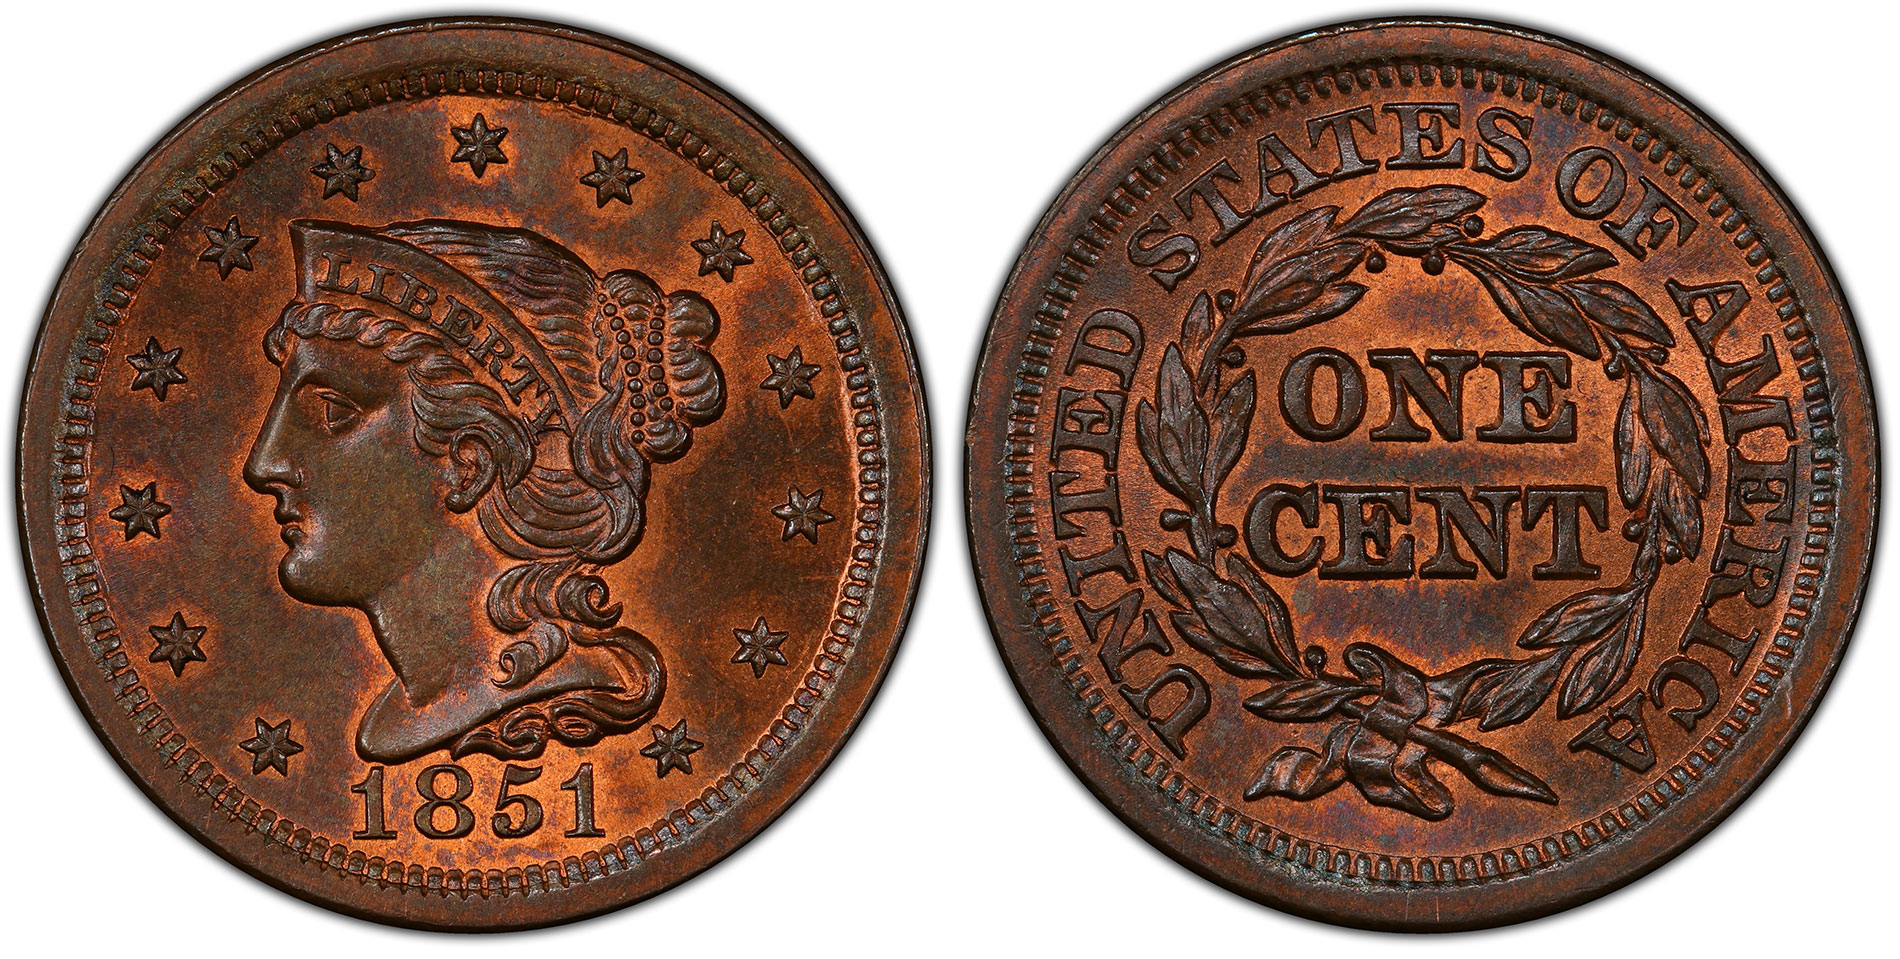 What Do RD, RB & BN Grading Designations Mean on Copper Coins?